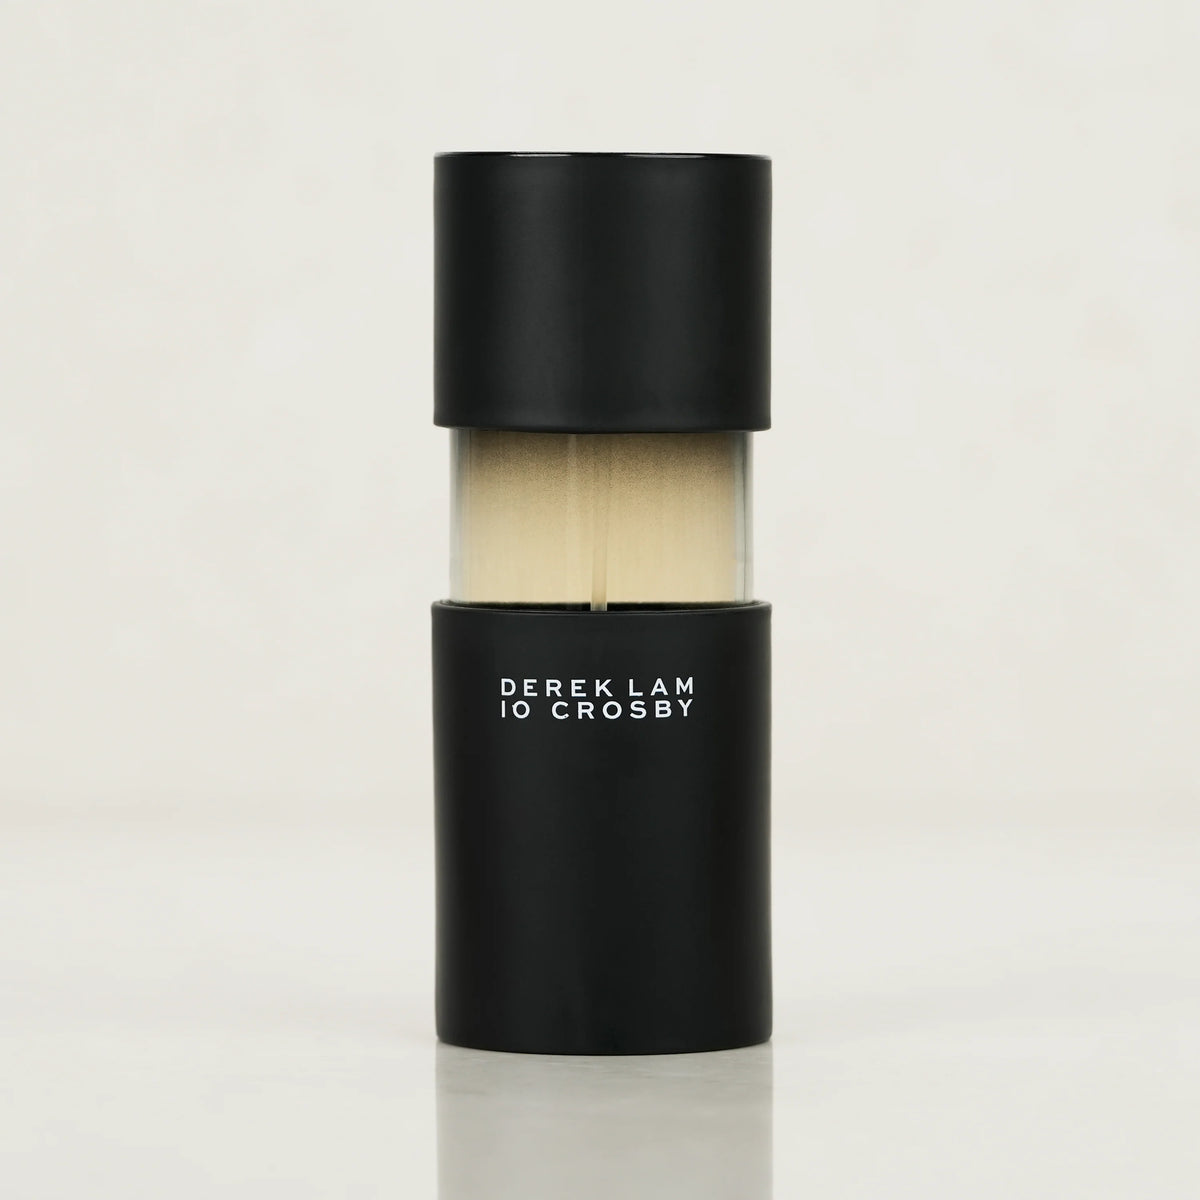 Derek Lam 10 Crosby Give Me the Night Perfume for Women